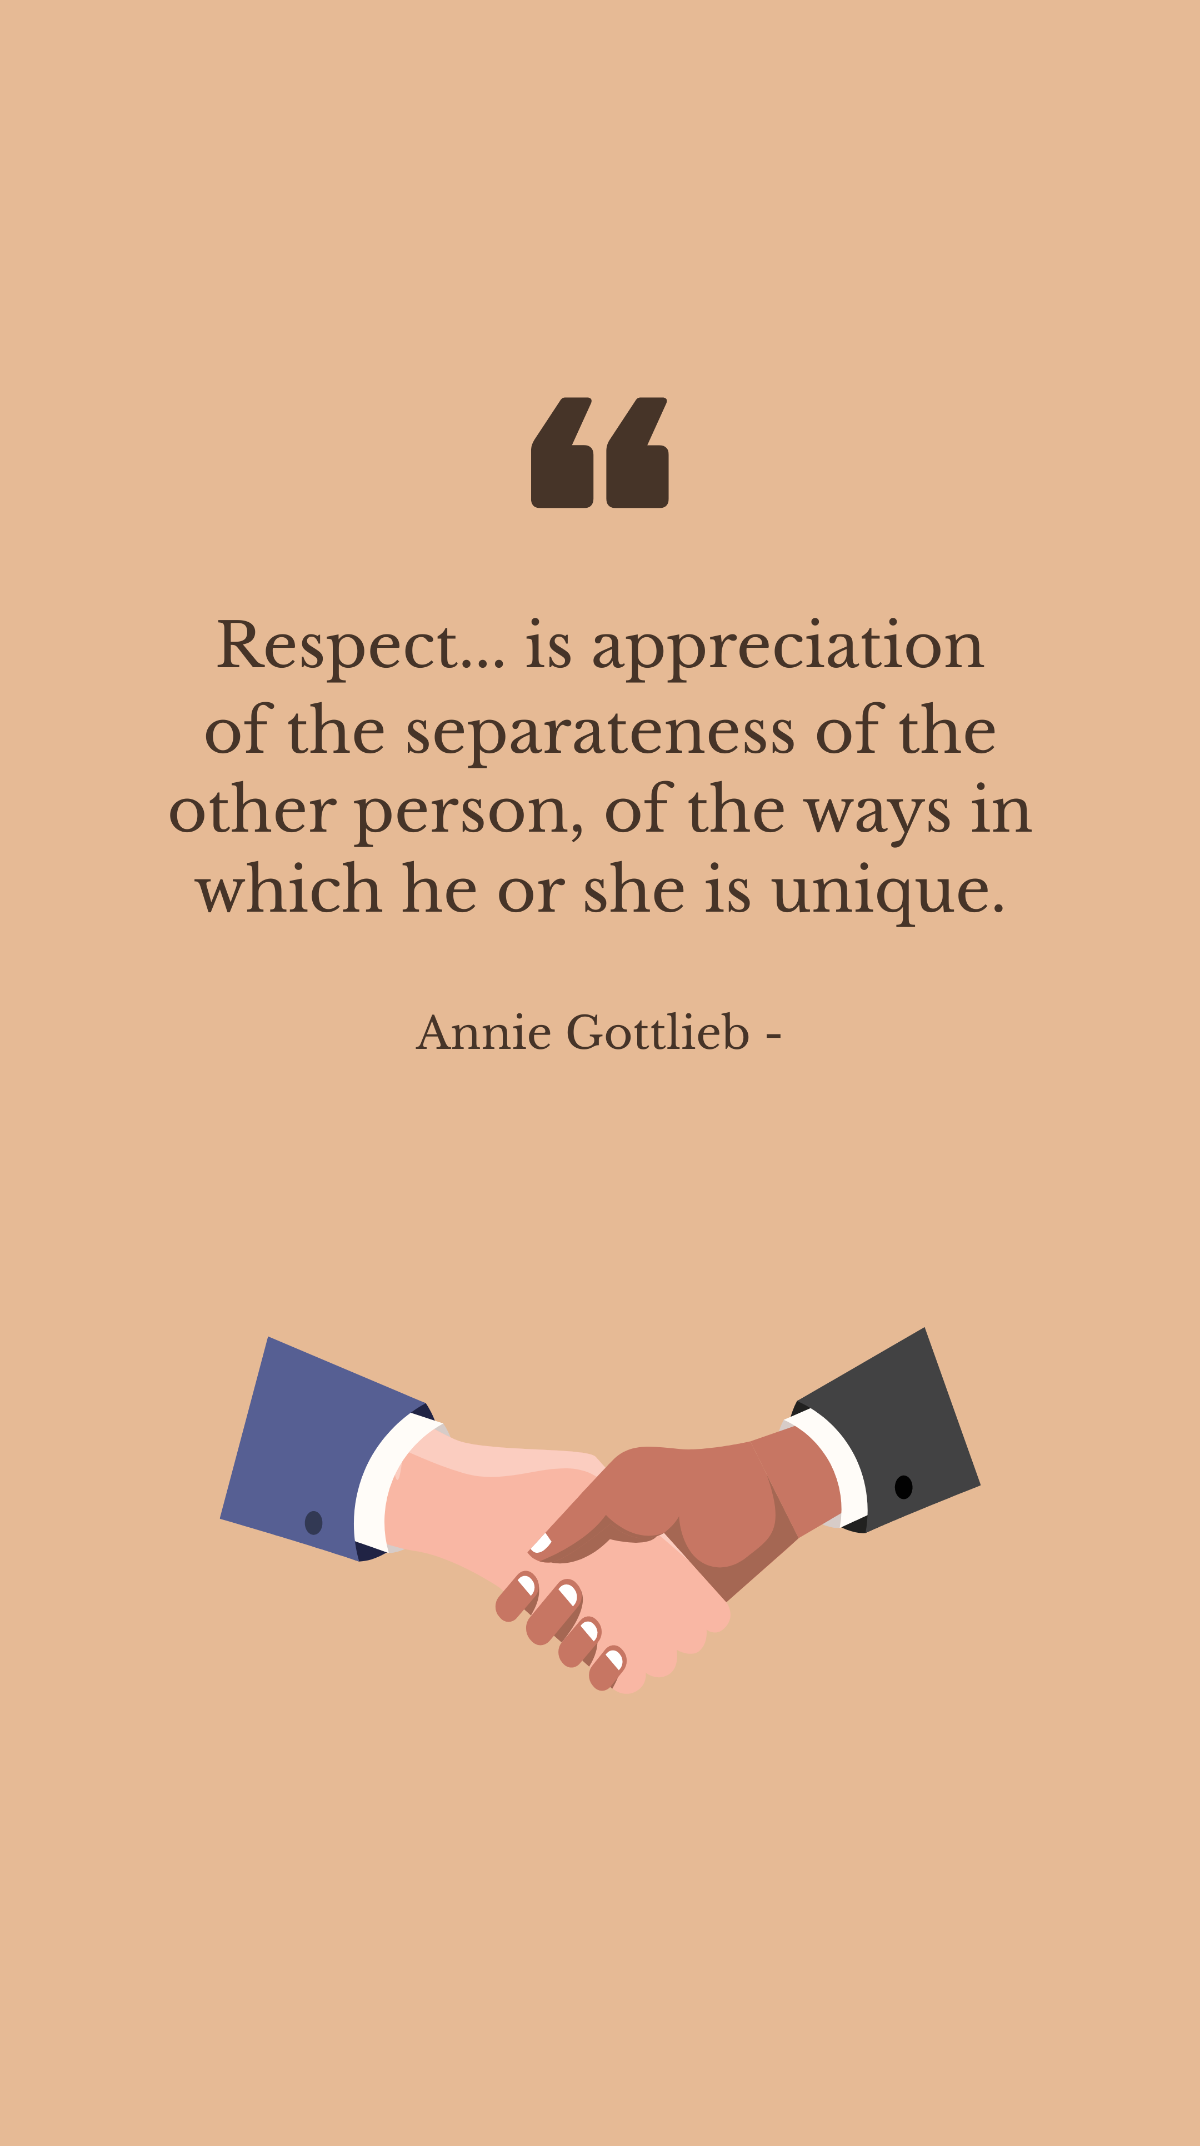 Free Annie Gottlieb - Respect... is appreciation of the separateness of the other person, of the ways in which he or she is unique. Template